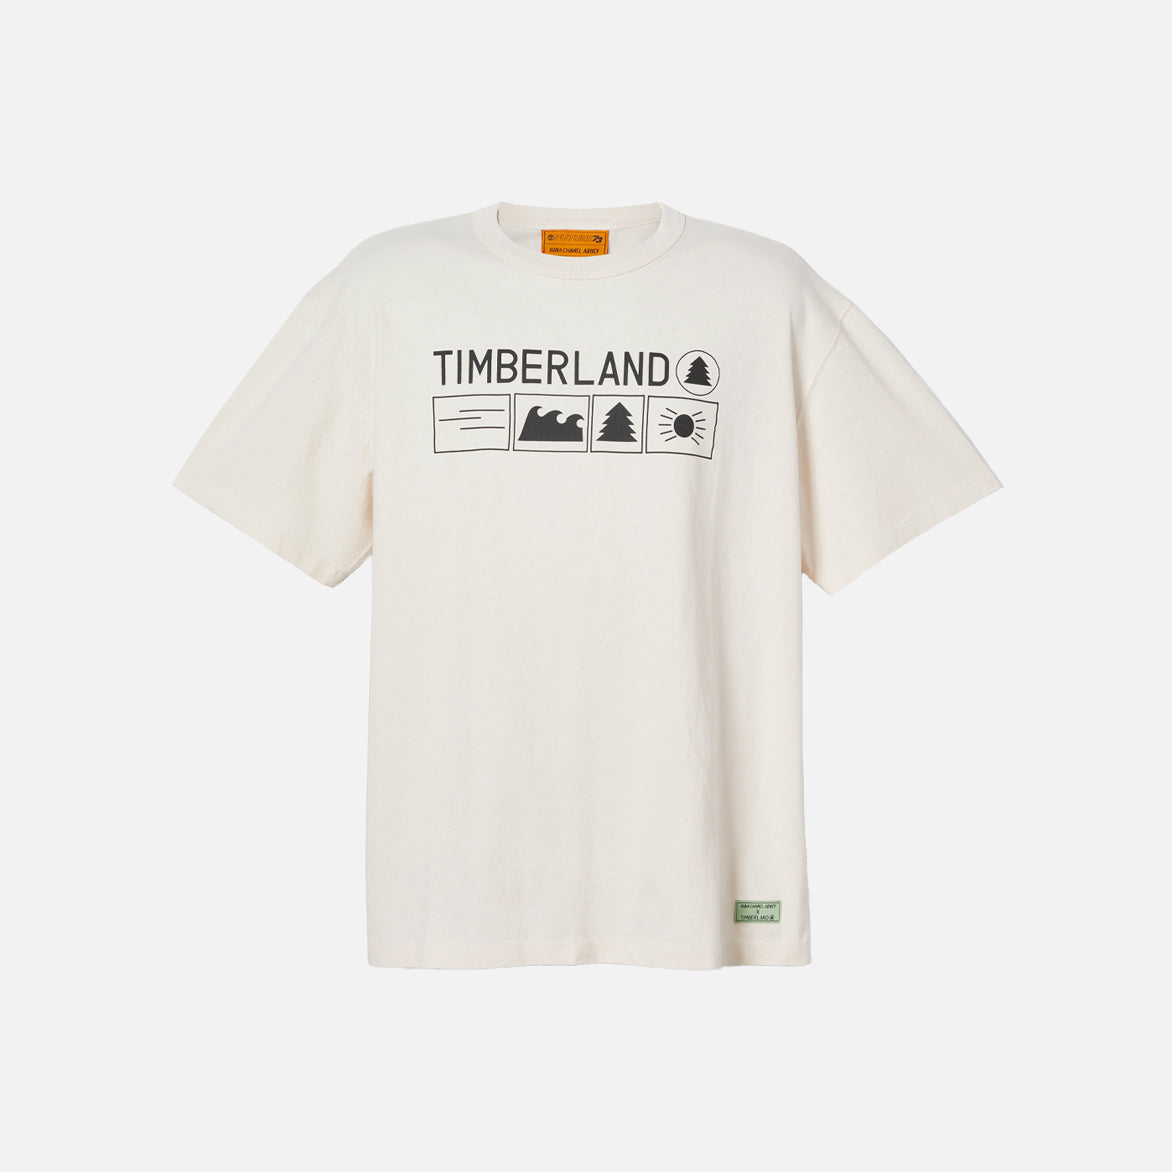 Nina Chanel Abney x Timberland Relaxed Fit Tee - Natural Xs